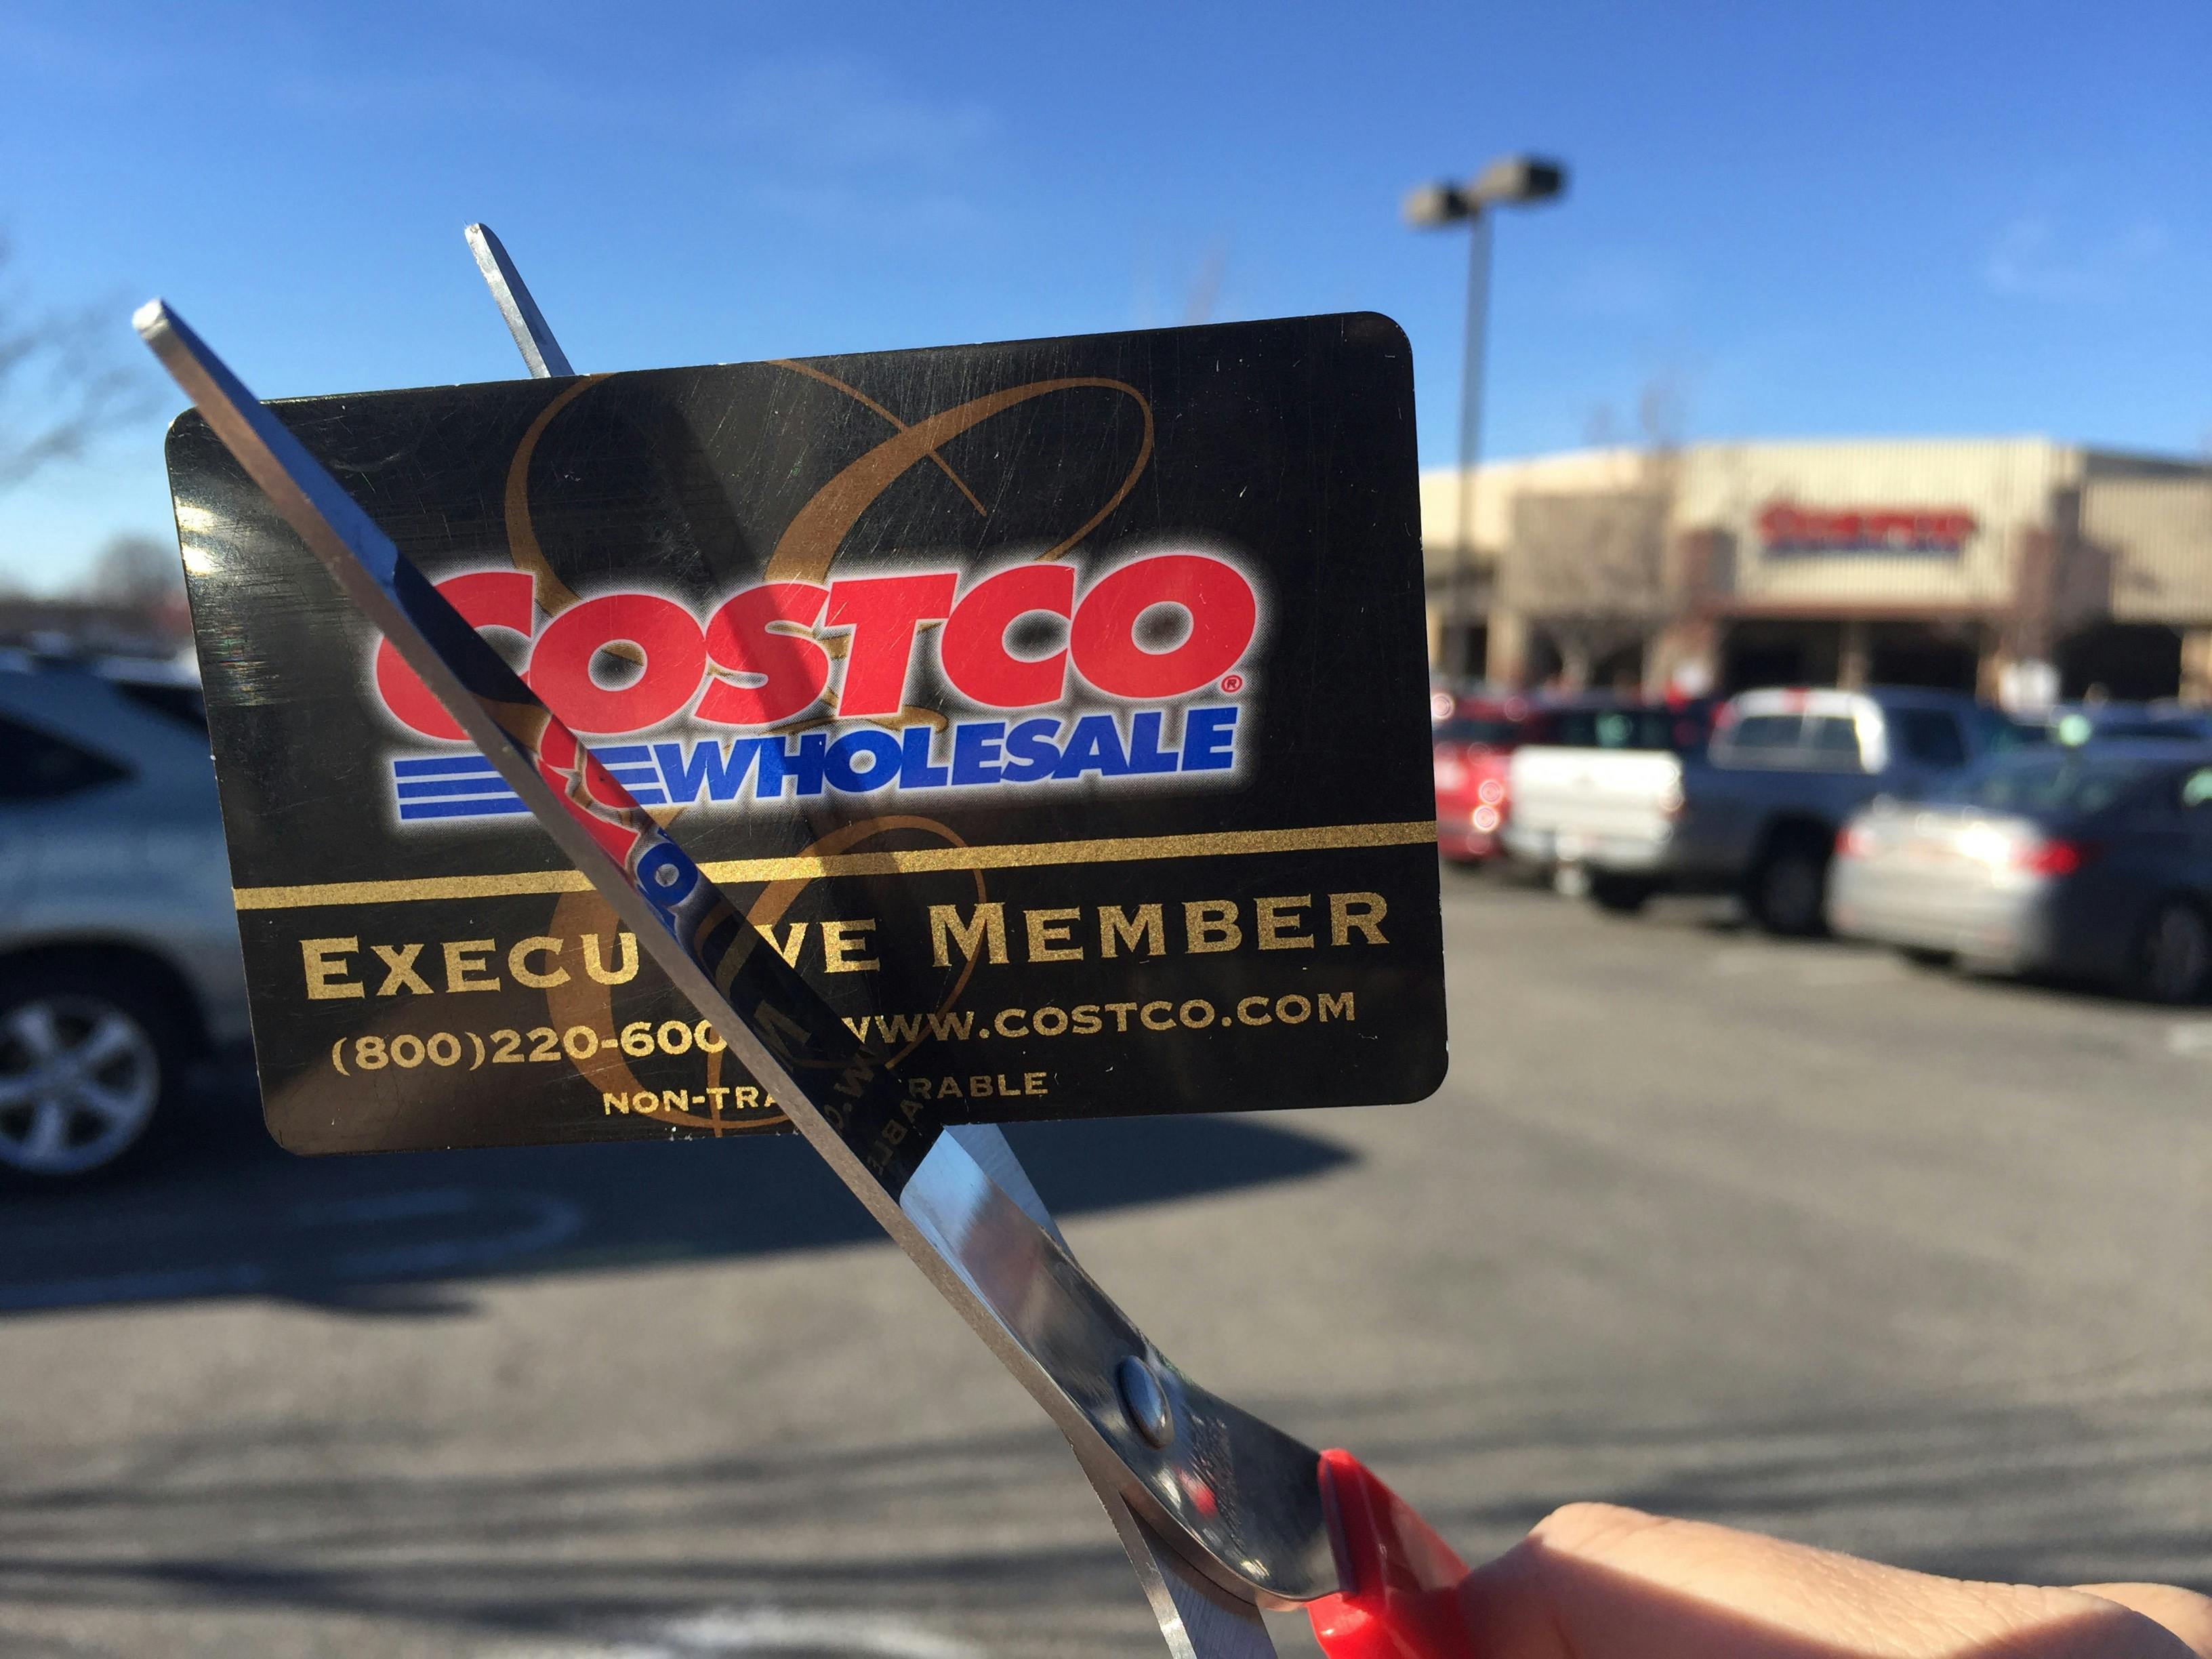 Costco Cash Card: What Is It + How Do You Use It? (2022)